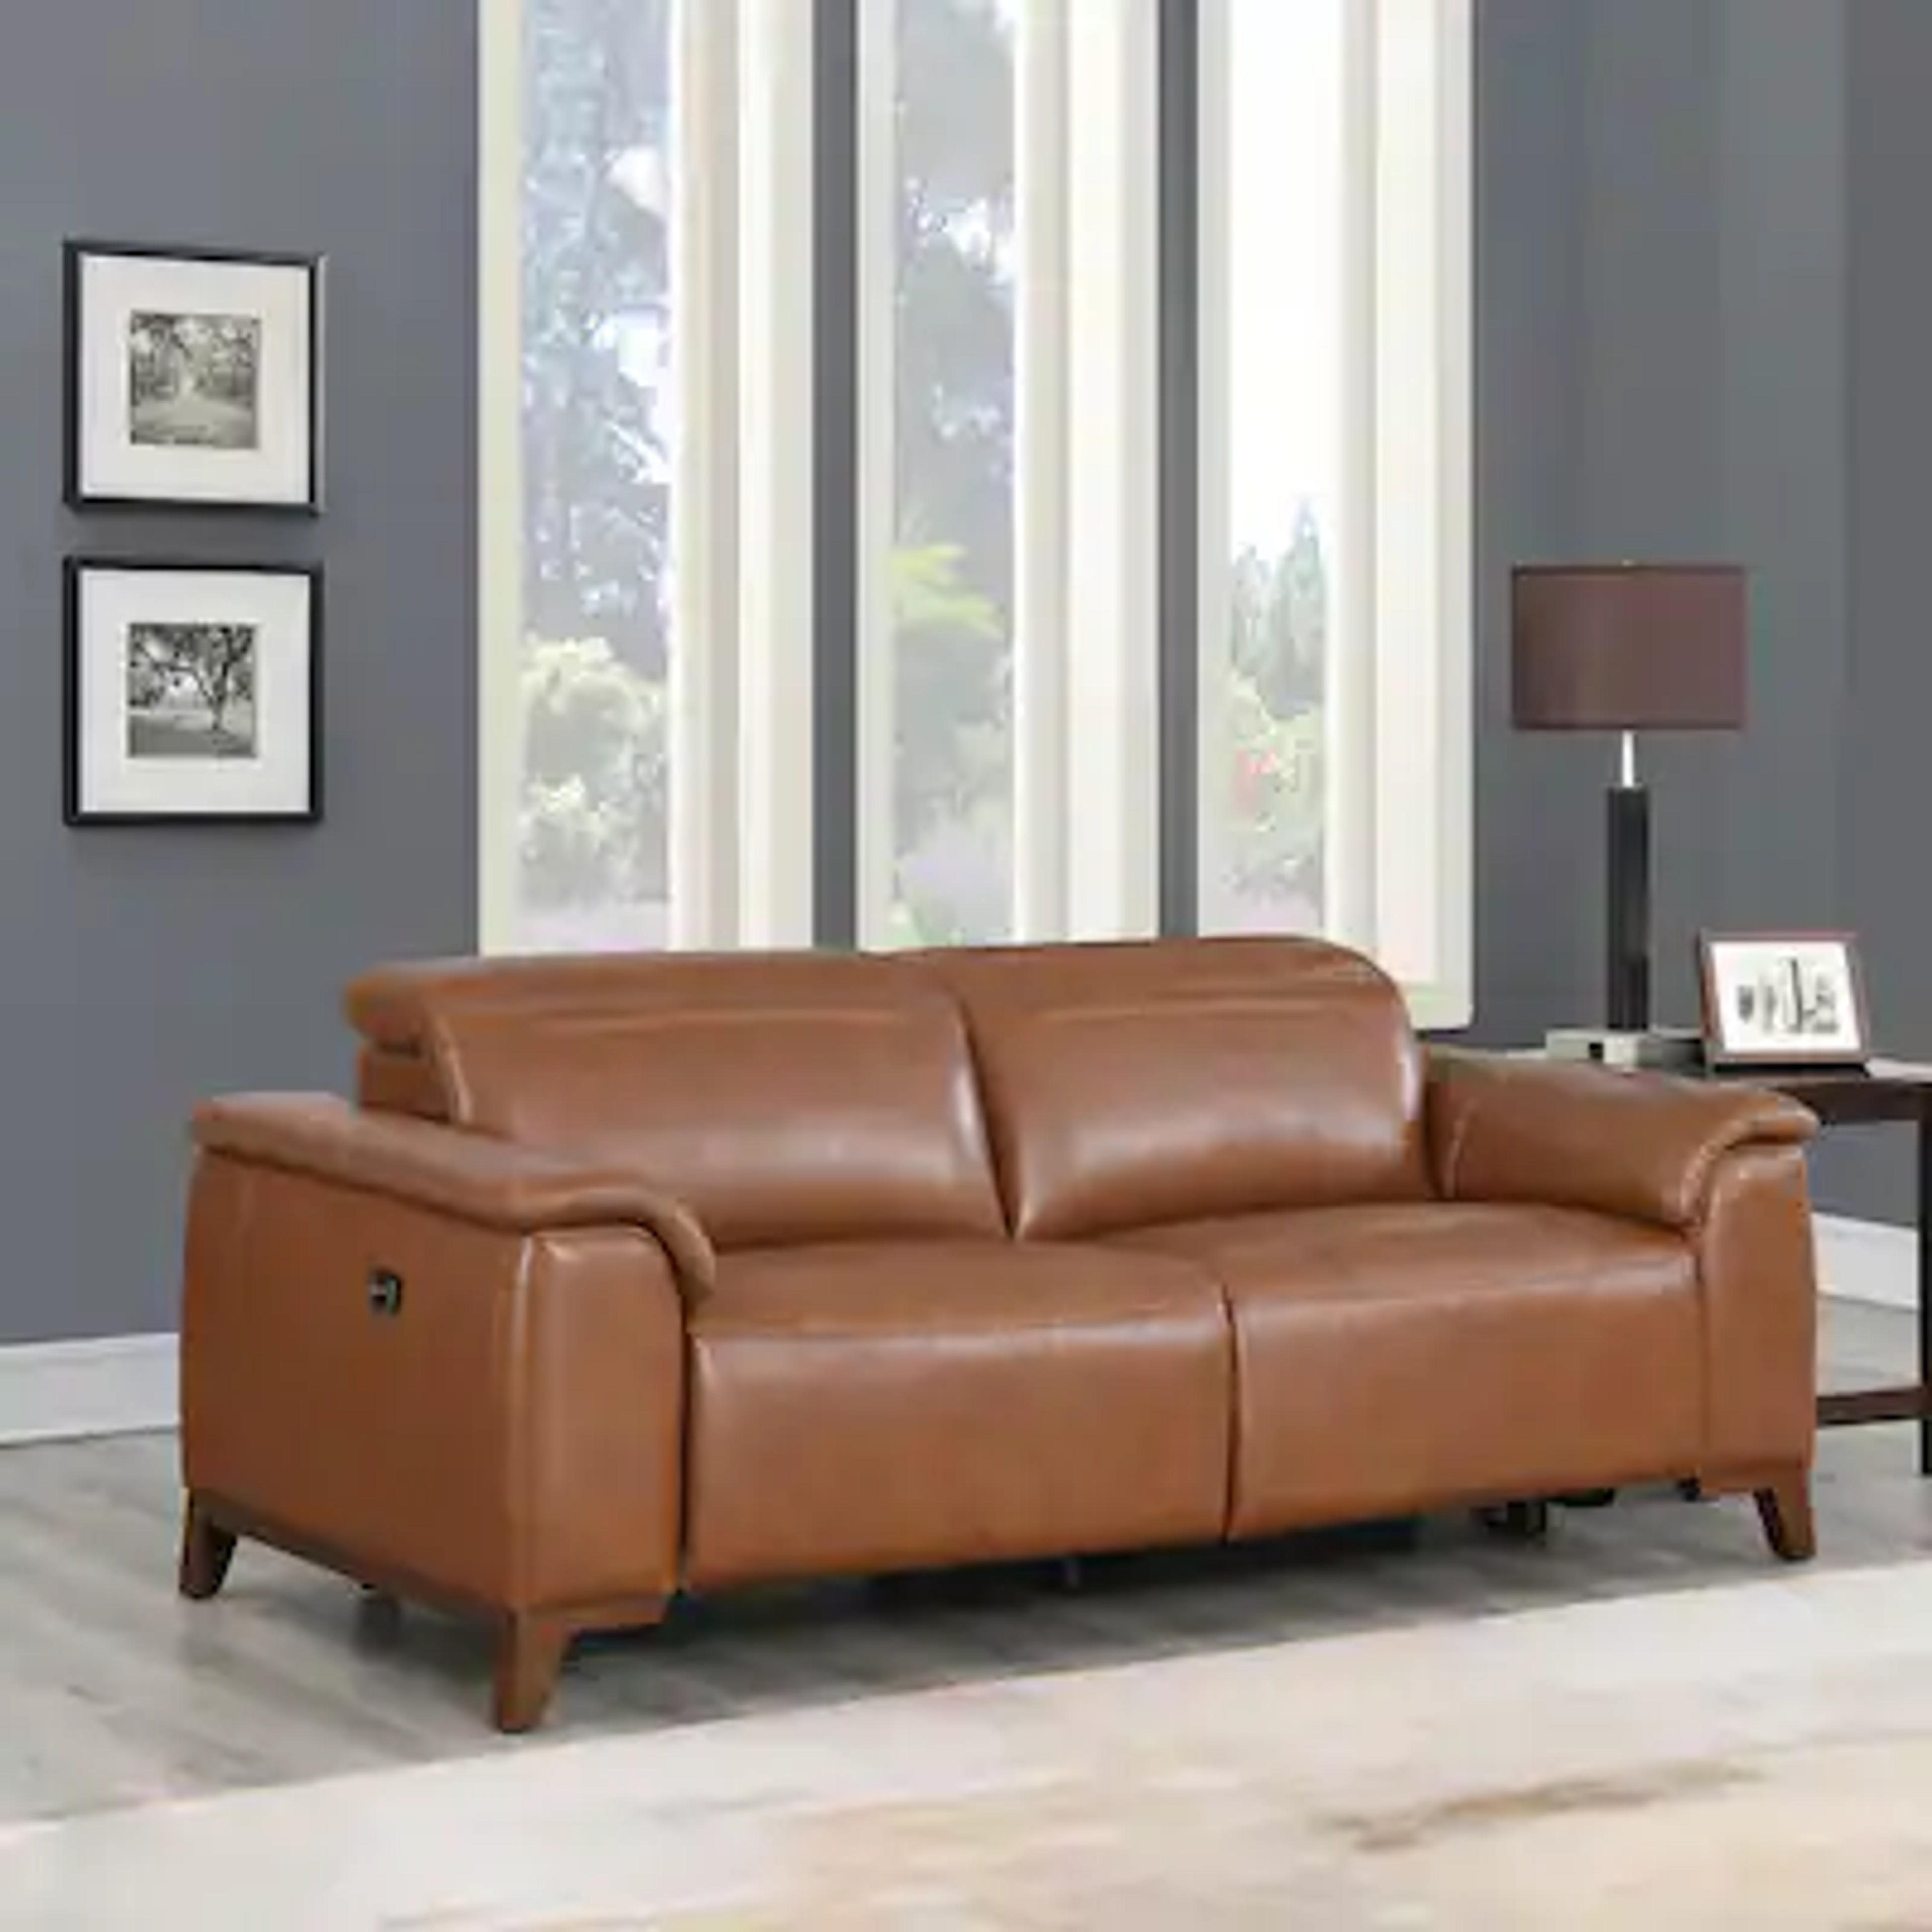 Buy Sofas & Couches Online at Overstock | Our Best Living Room Furniture Deals